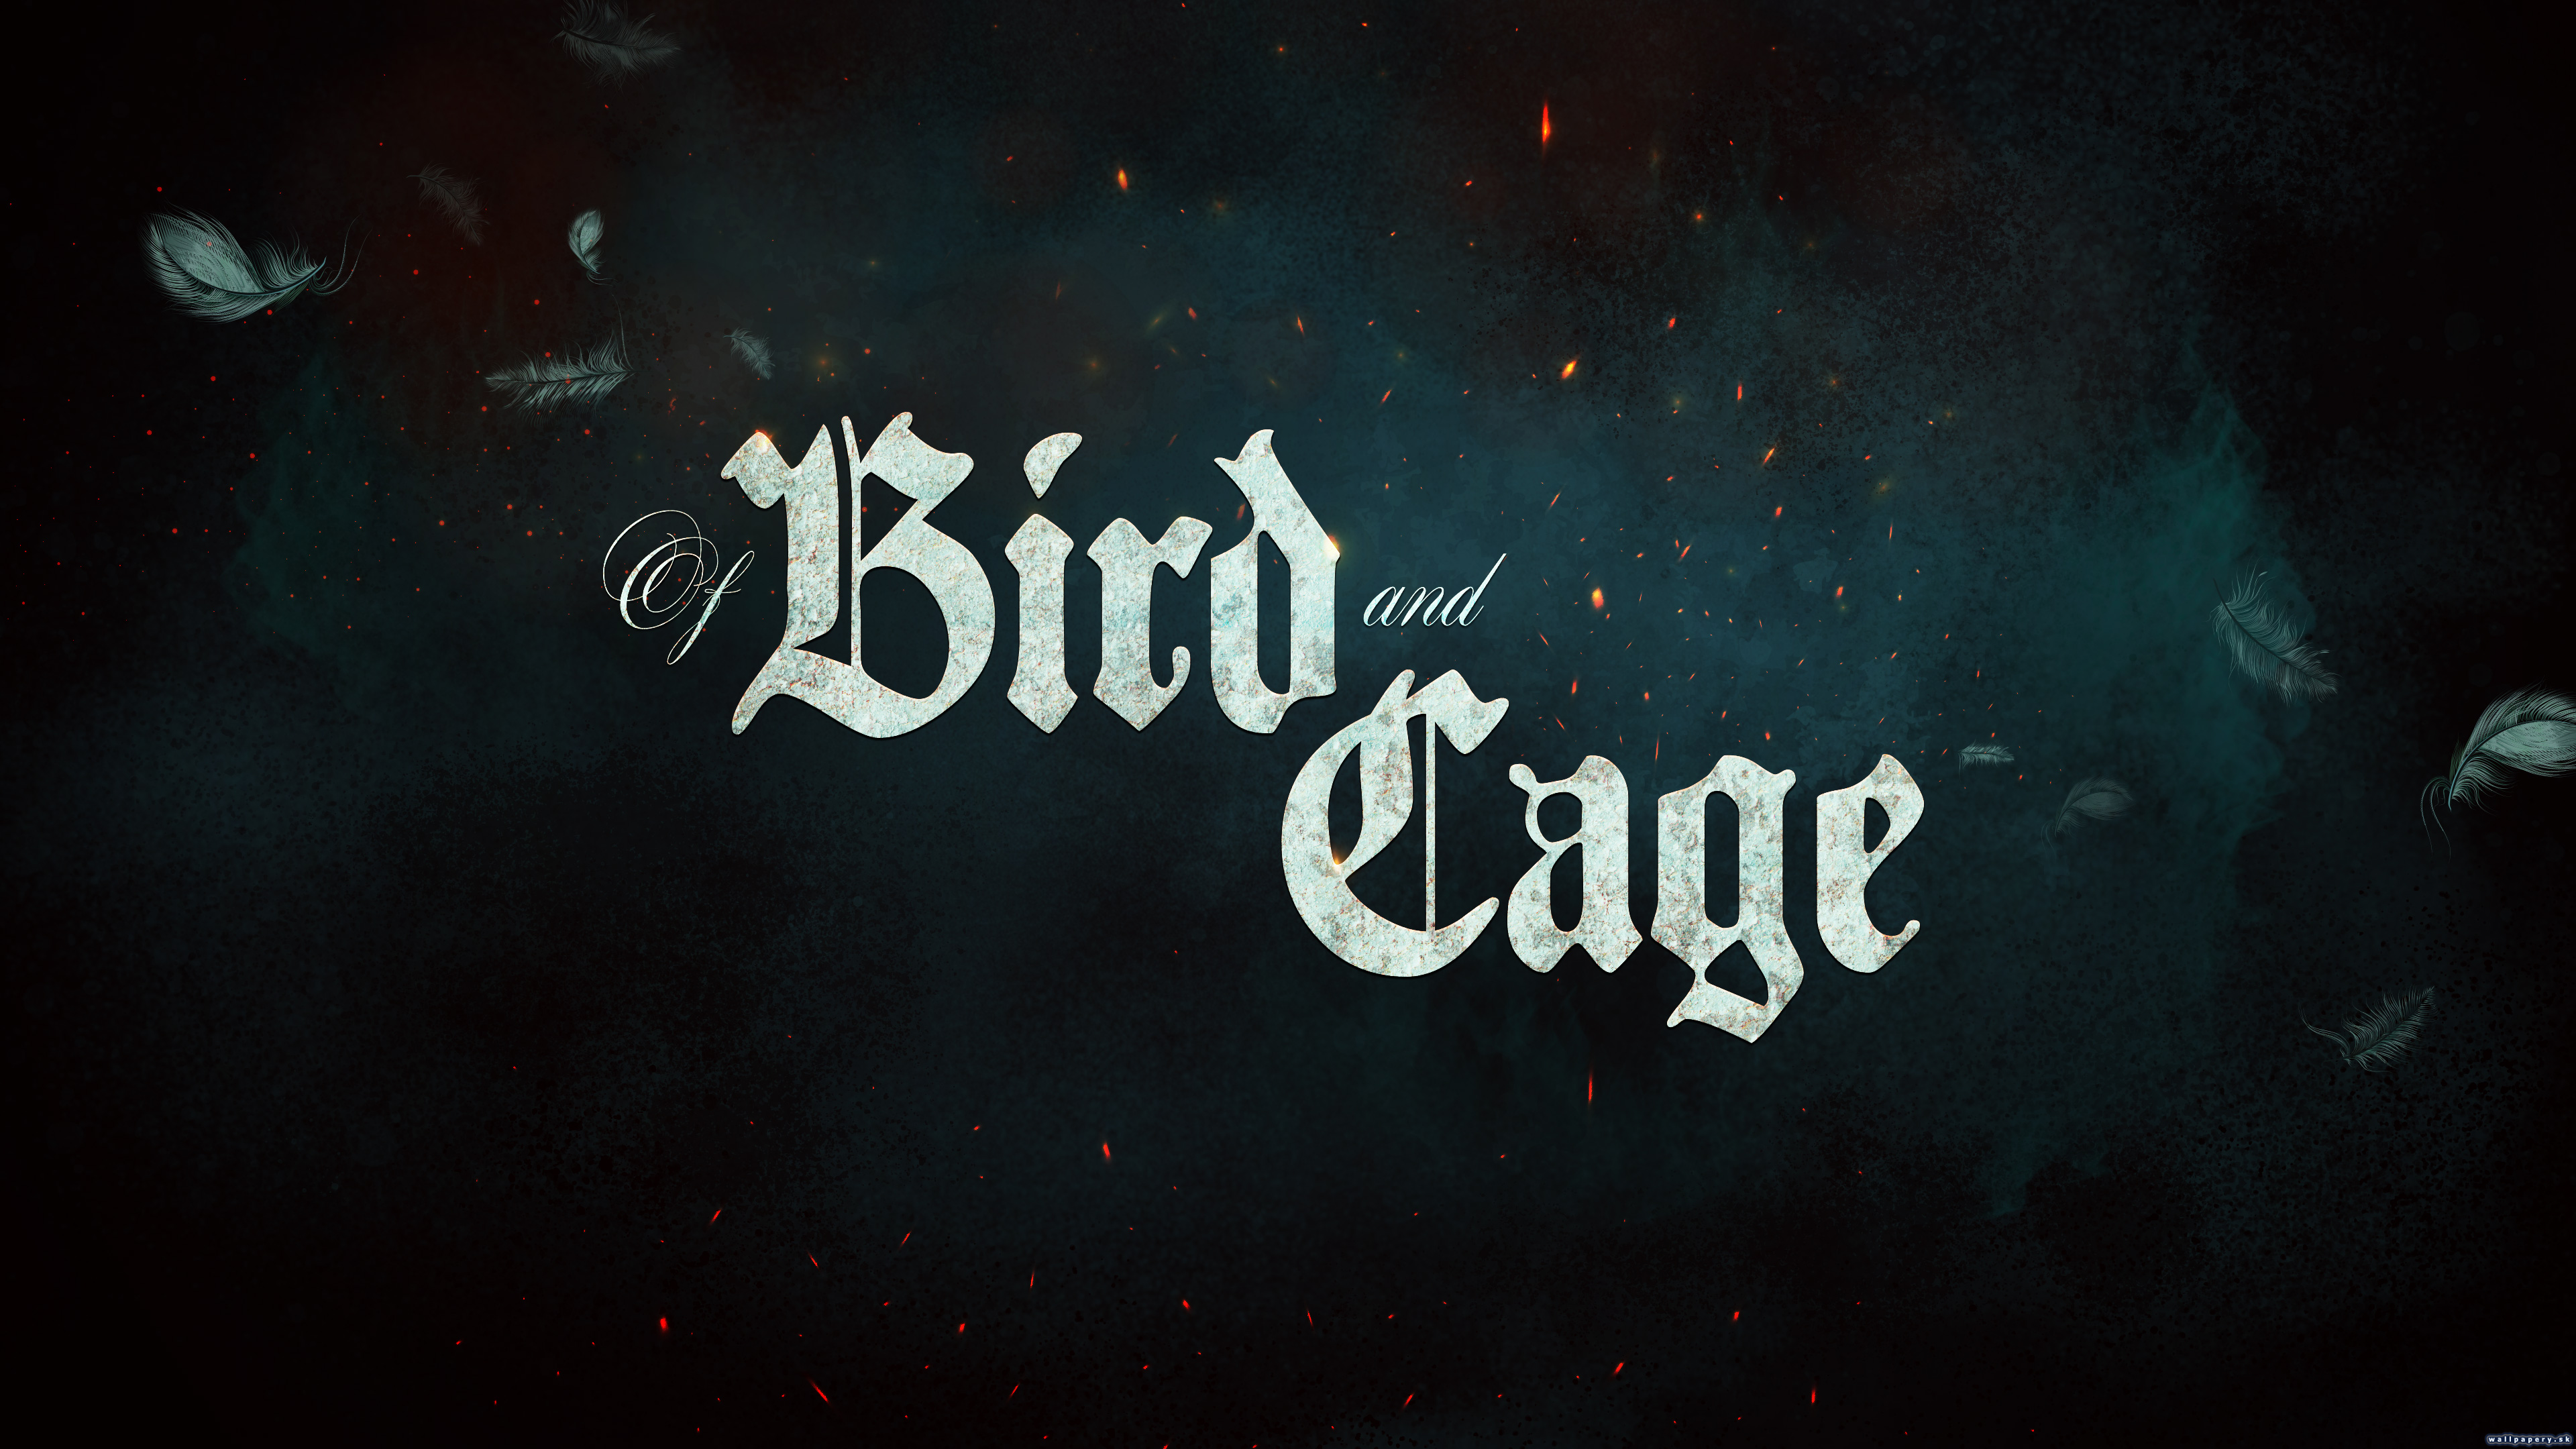 Of Bird and Cage - wallpaper 2